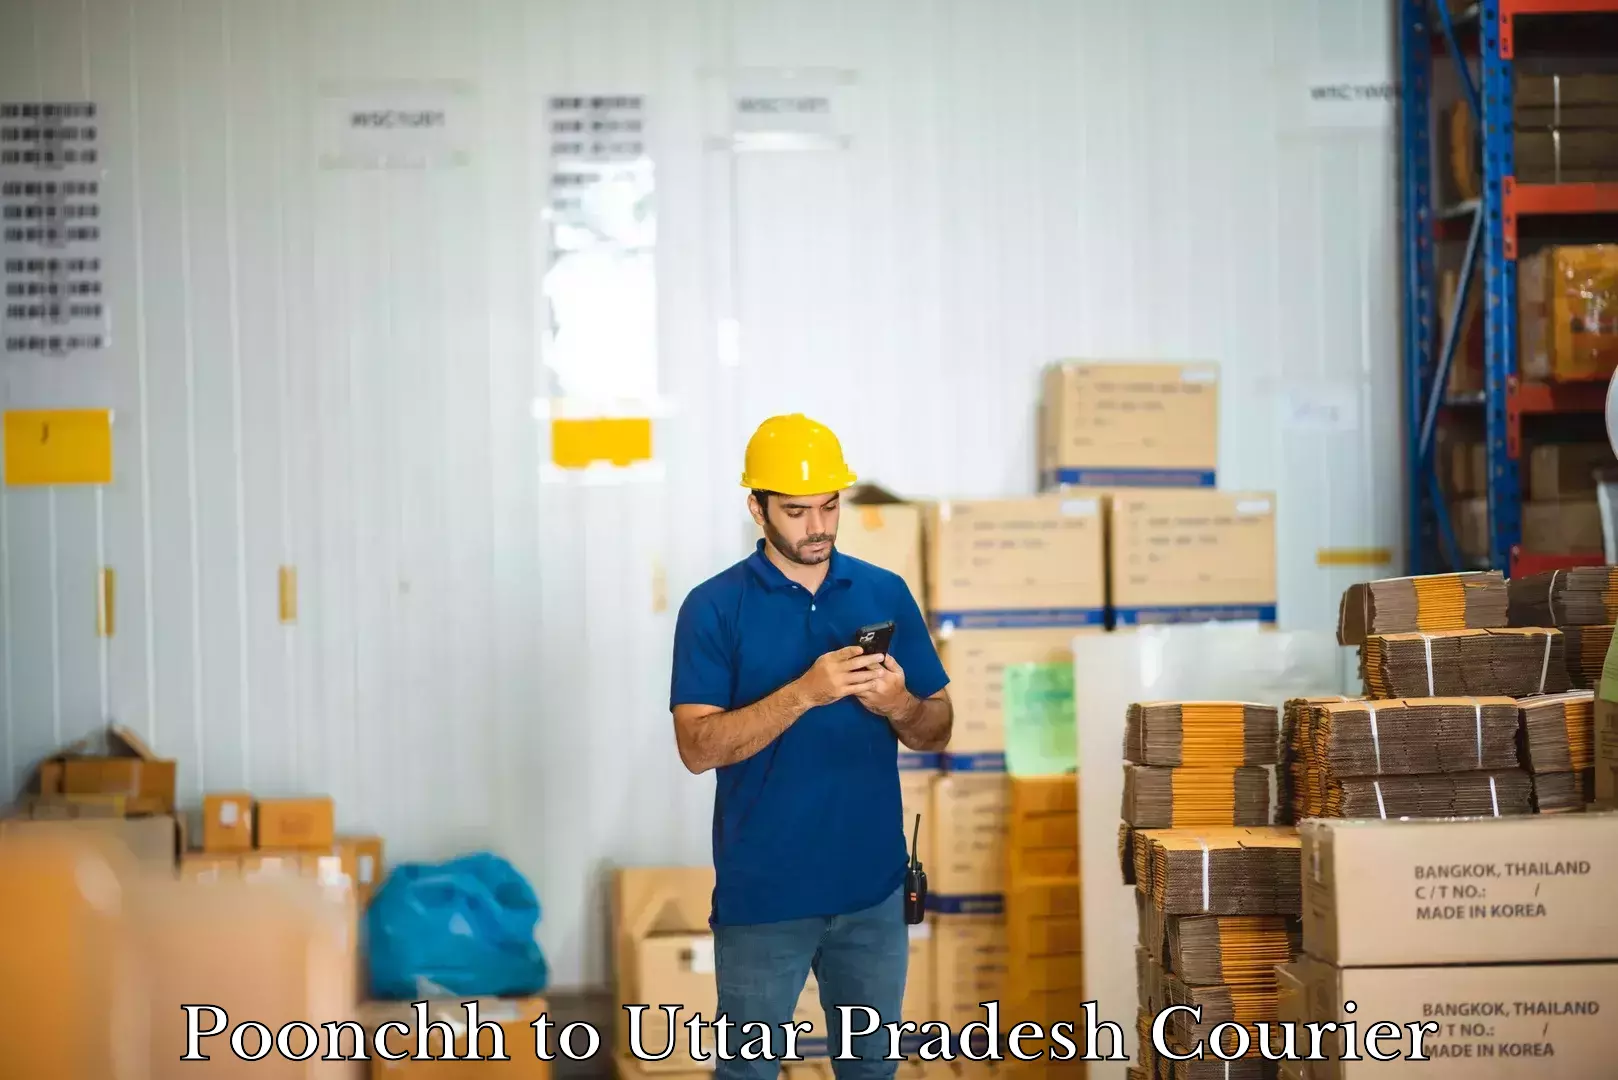 Luggage shipping specialists Poonchh to Uttar Pradesh